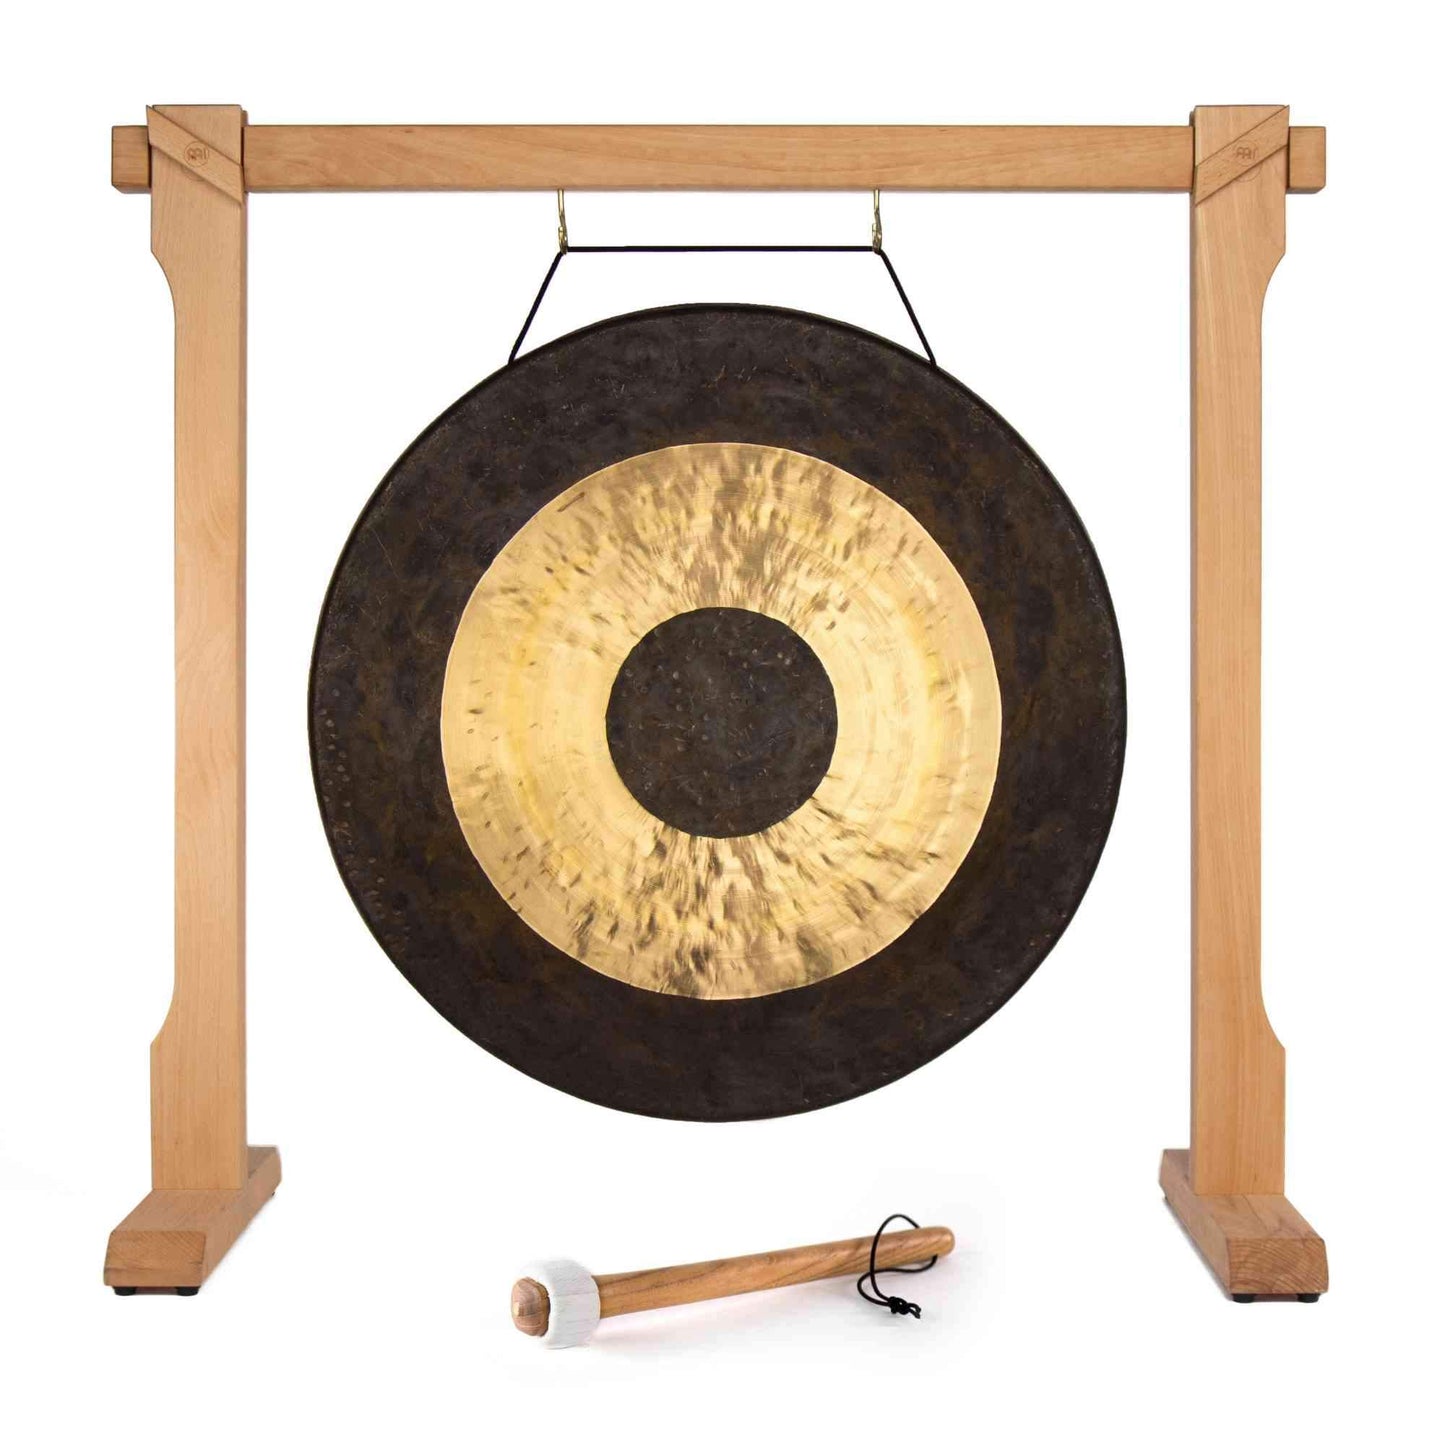 The Gong Shop Chinese Gongs with Stands 40" Chau Gong on Meinl Wooden Gong Stand with Mallet